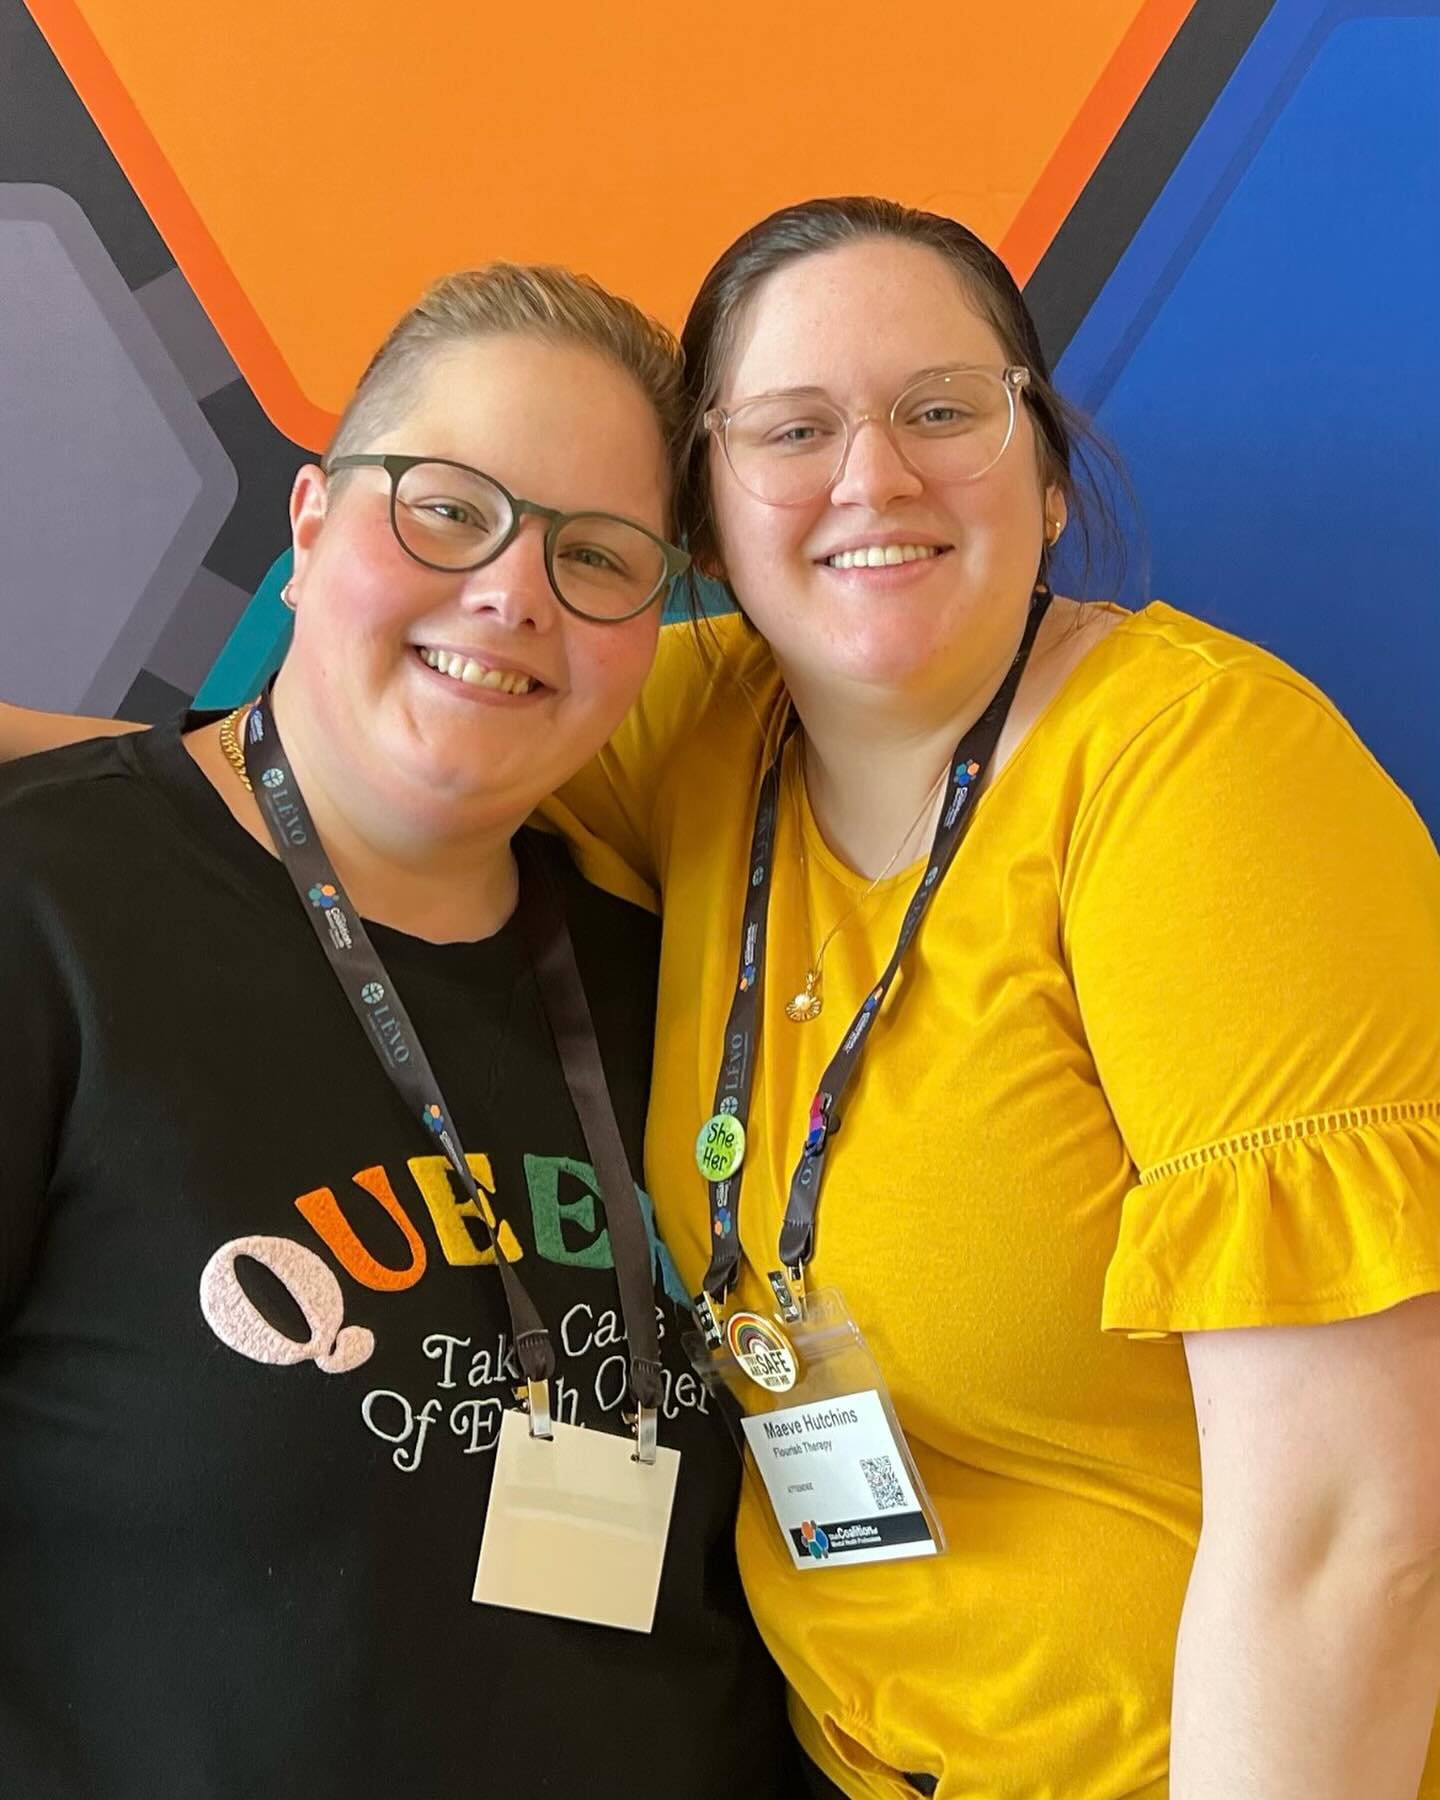 The happenings at the Utah Coalition of Mental Health Professionals: friends, continued learning, and cats 😻 I was excited to share the space and friends with Maeve - my supervisee or duckling 🐥
#queertherapist #outandabout #lgbtqia #mentalhealthaw